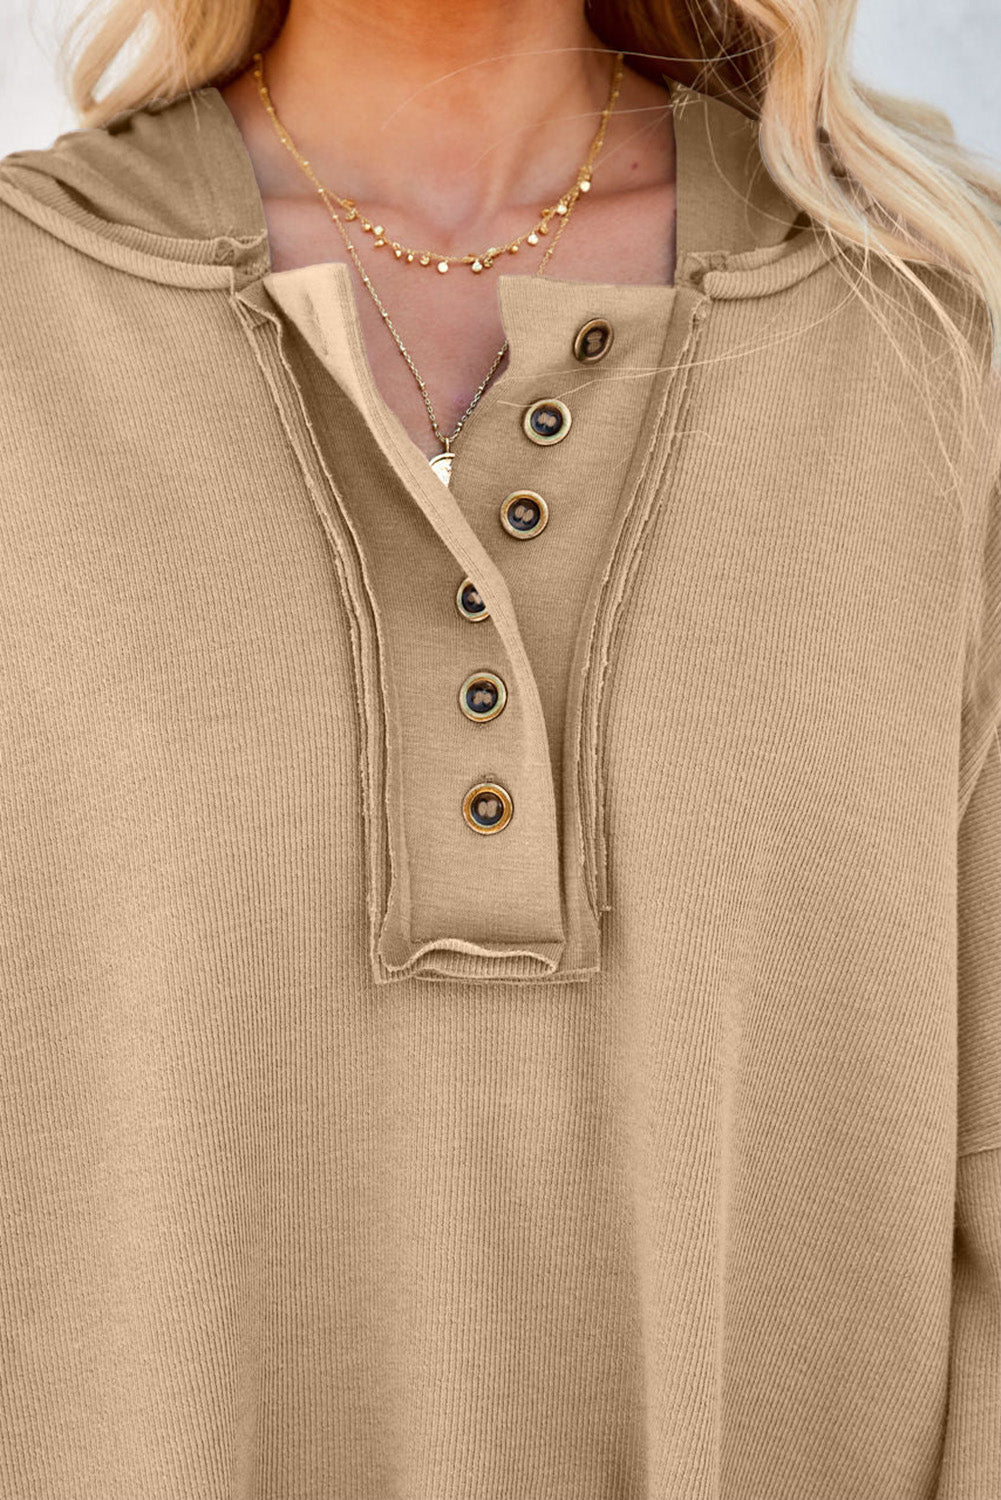 Grey Solid Casual Button Patchwork Trim Hoodie